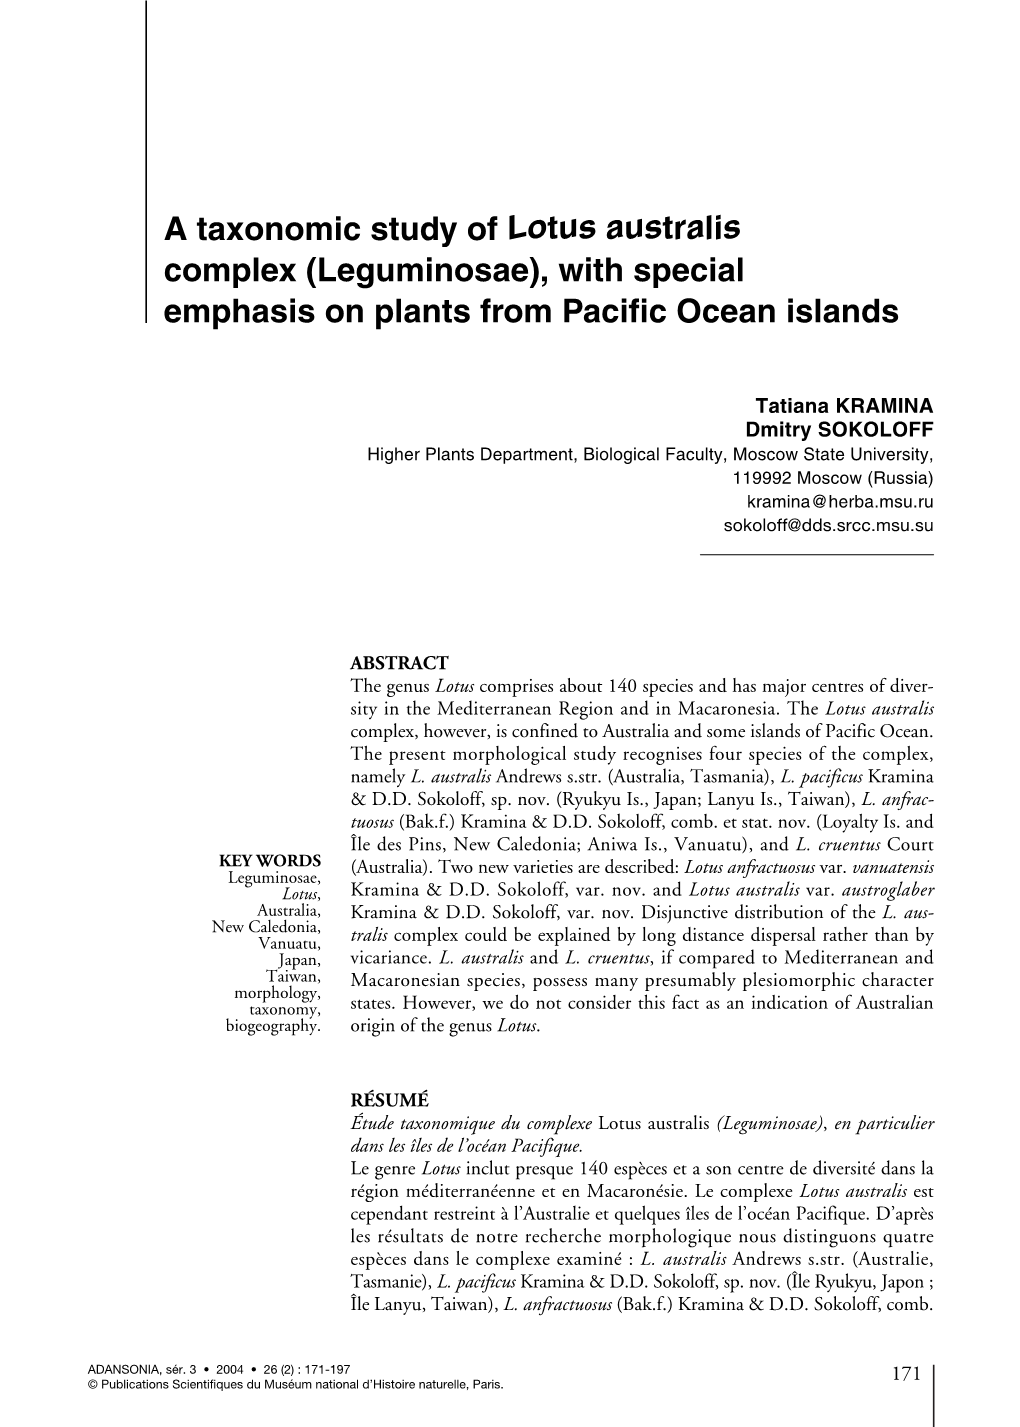 A Taxonomic Study of Lotus Australis Complex (Leguminosae), with Special Emphasis on Plants from Pacific Ocean Islands